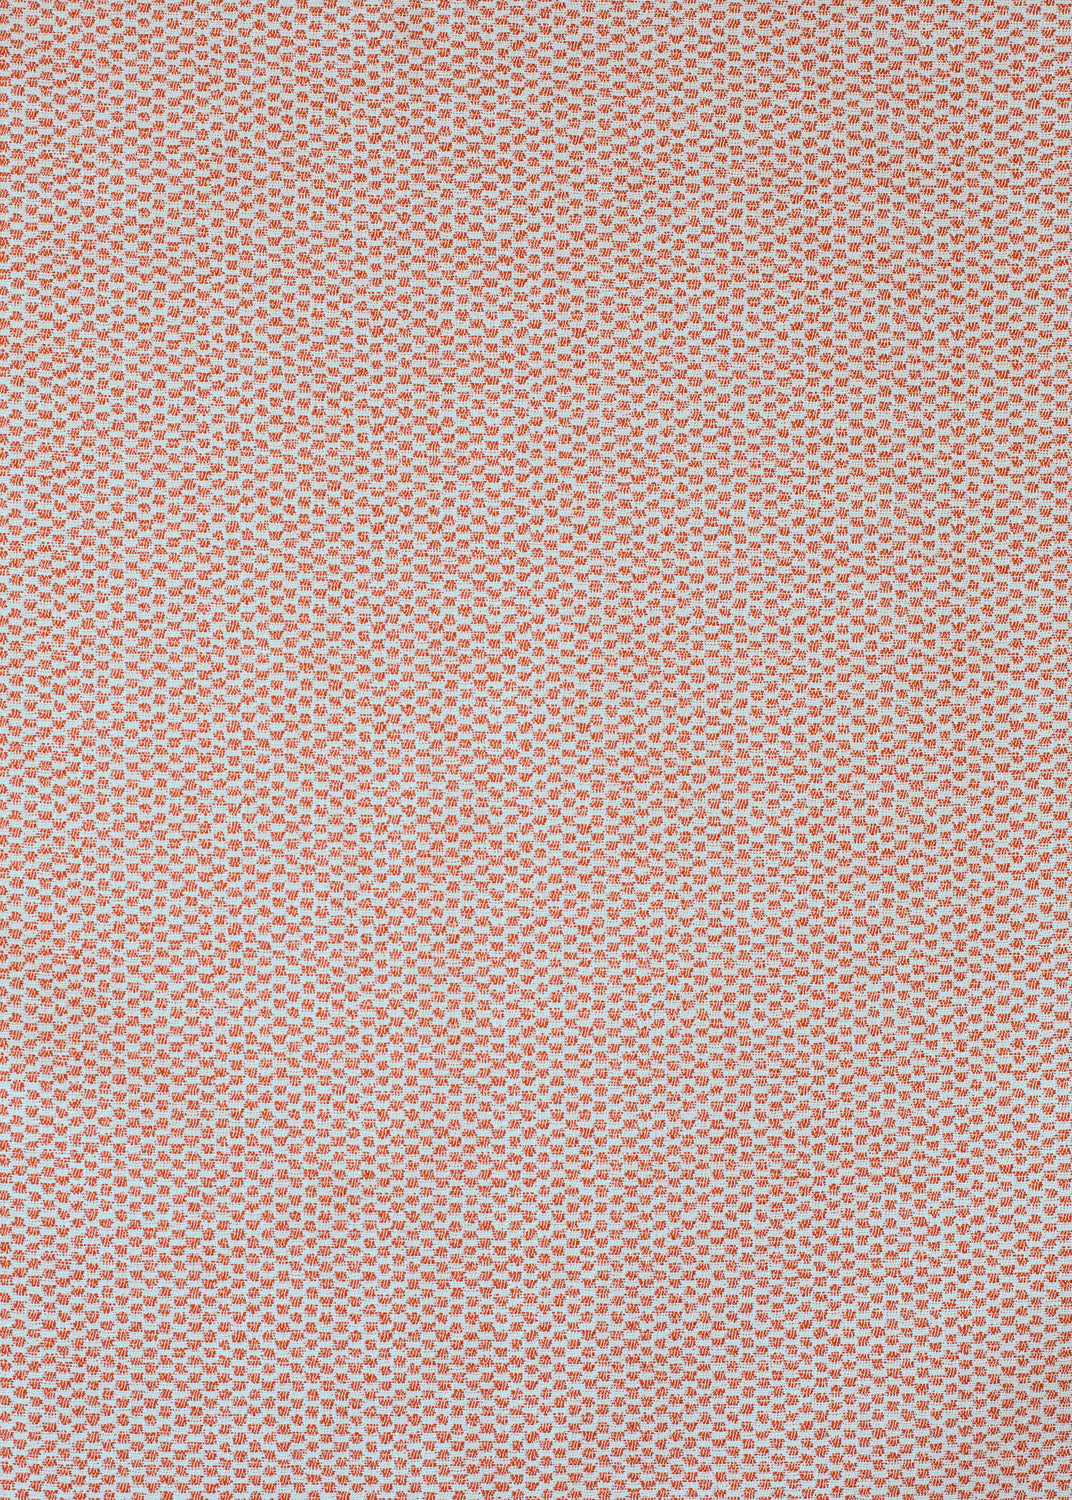 Detail of the reverse side of fabric in a dense checked weave in red and white.